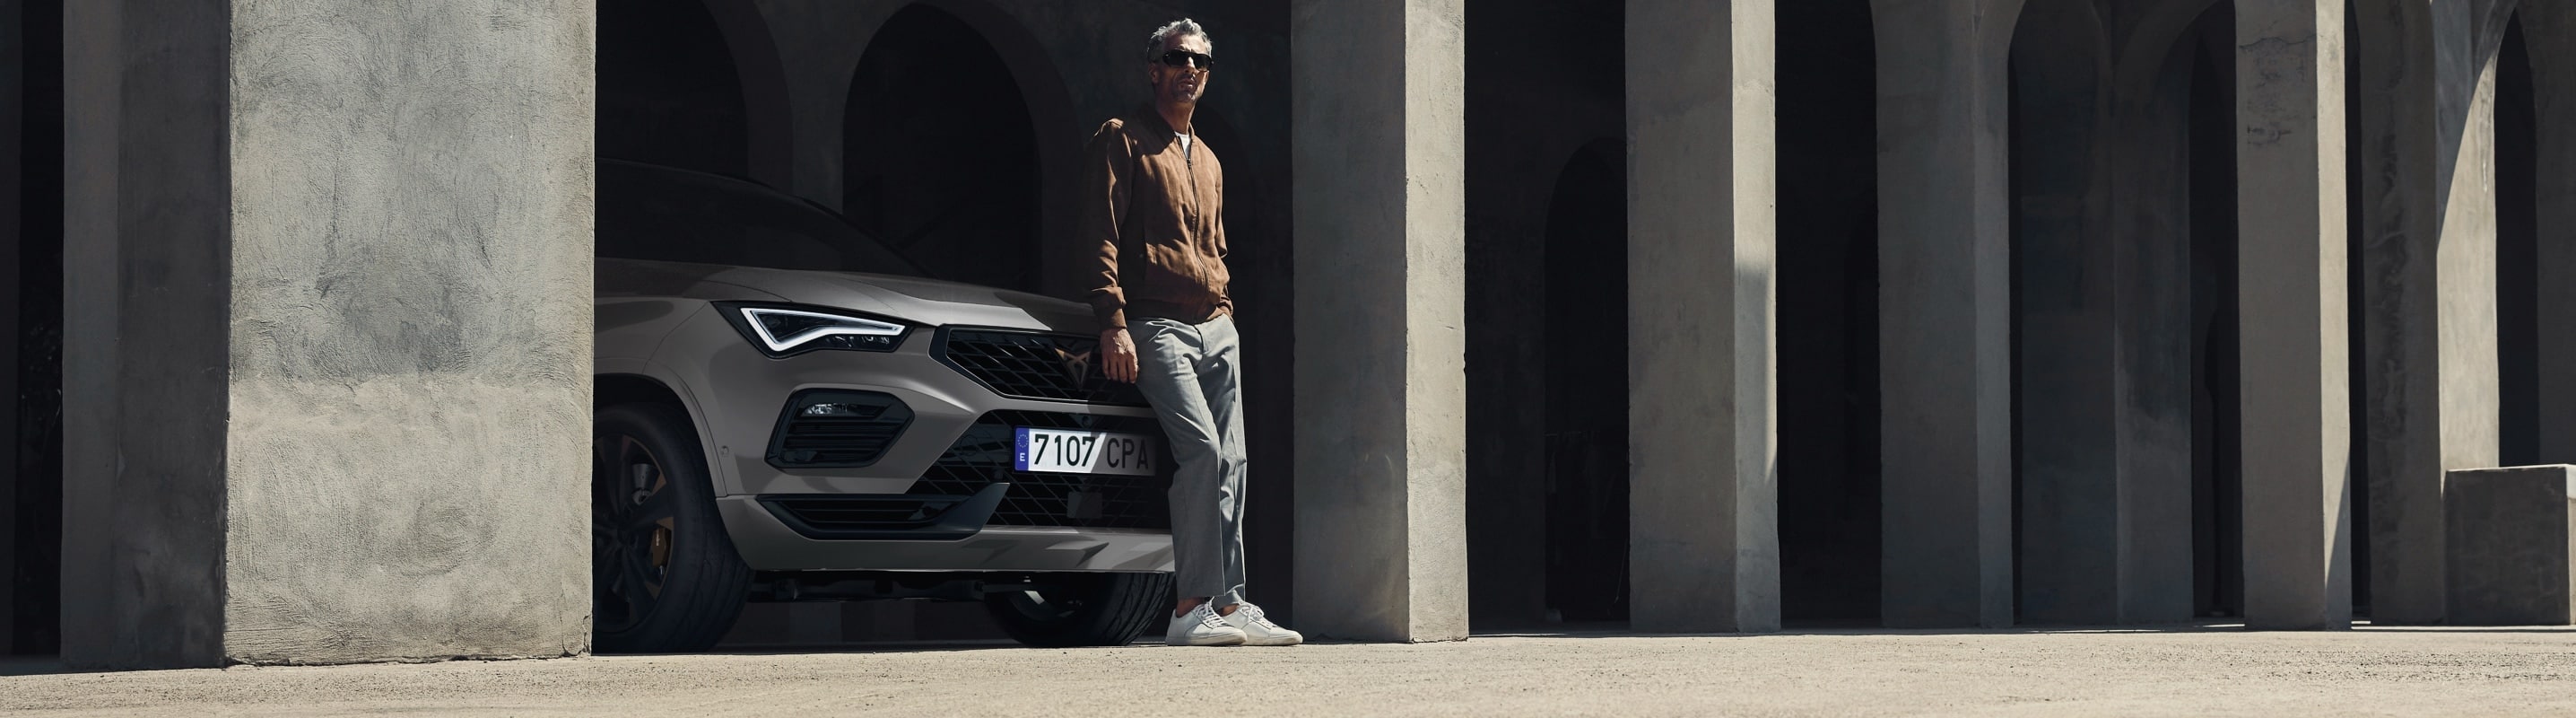 Man leaning on CUPRA Formentor front grill